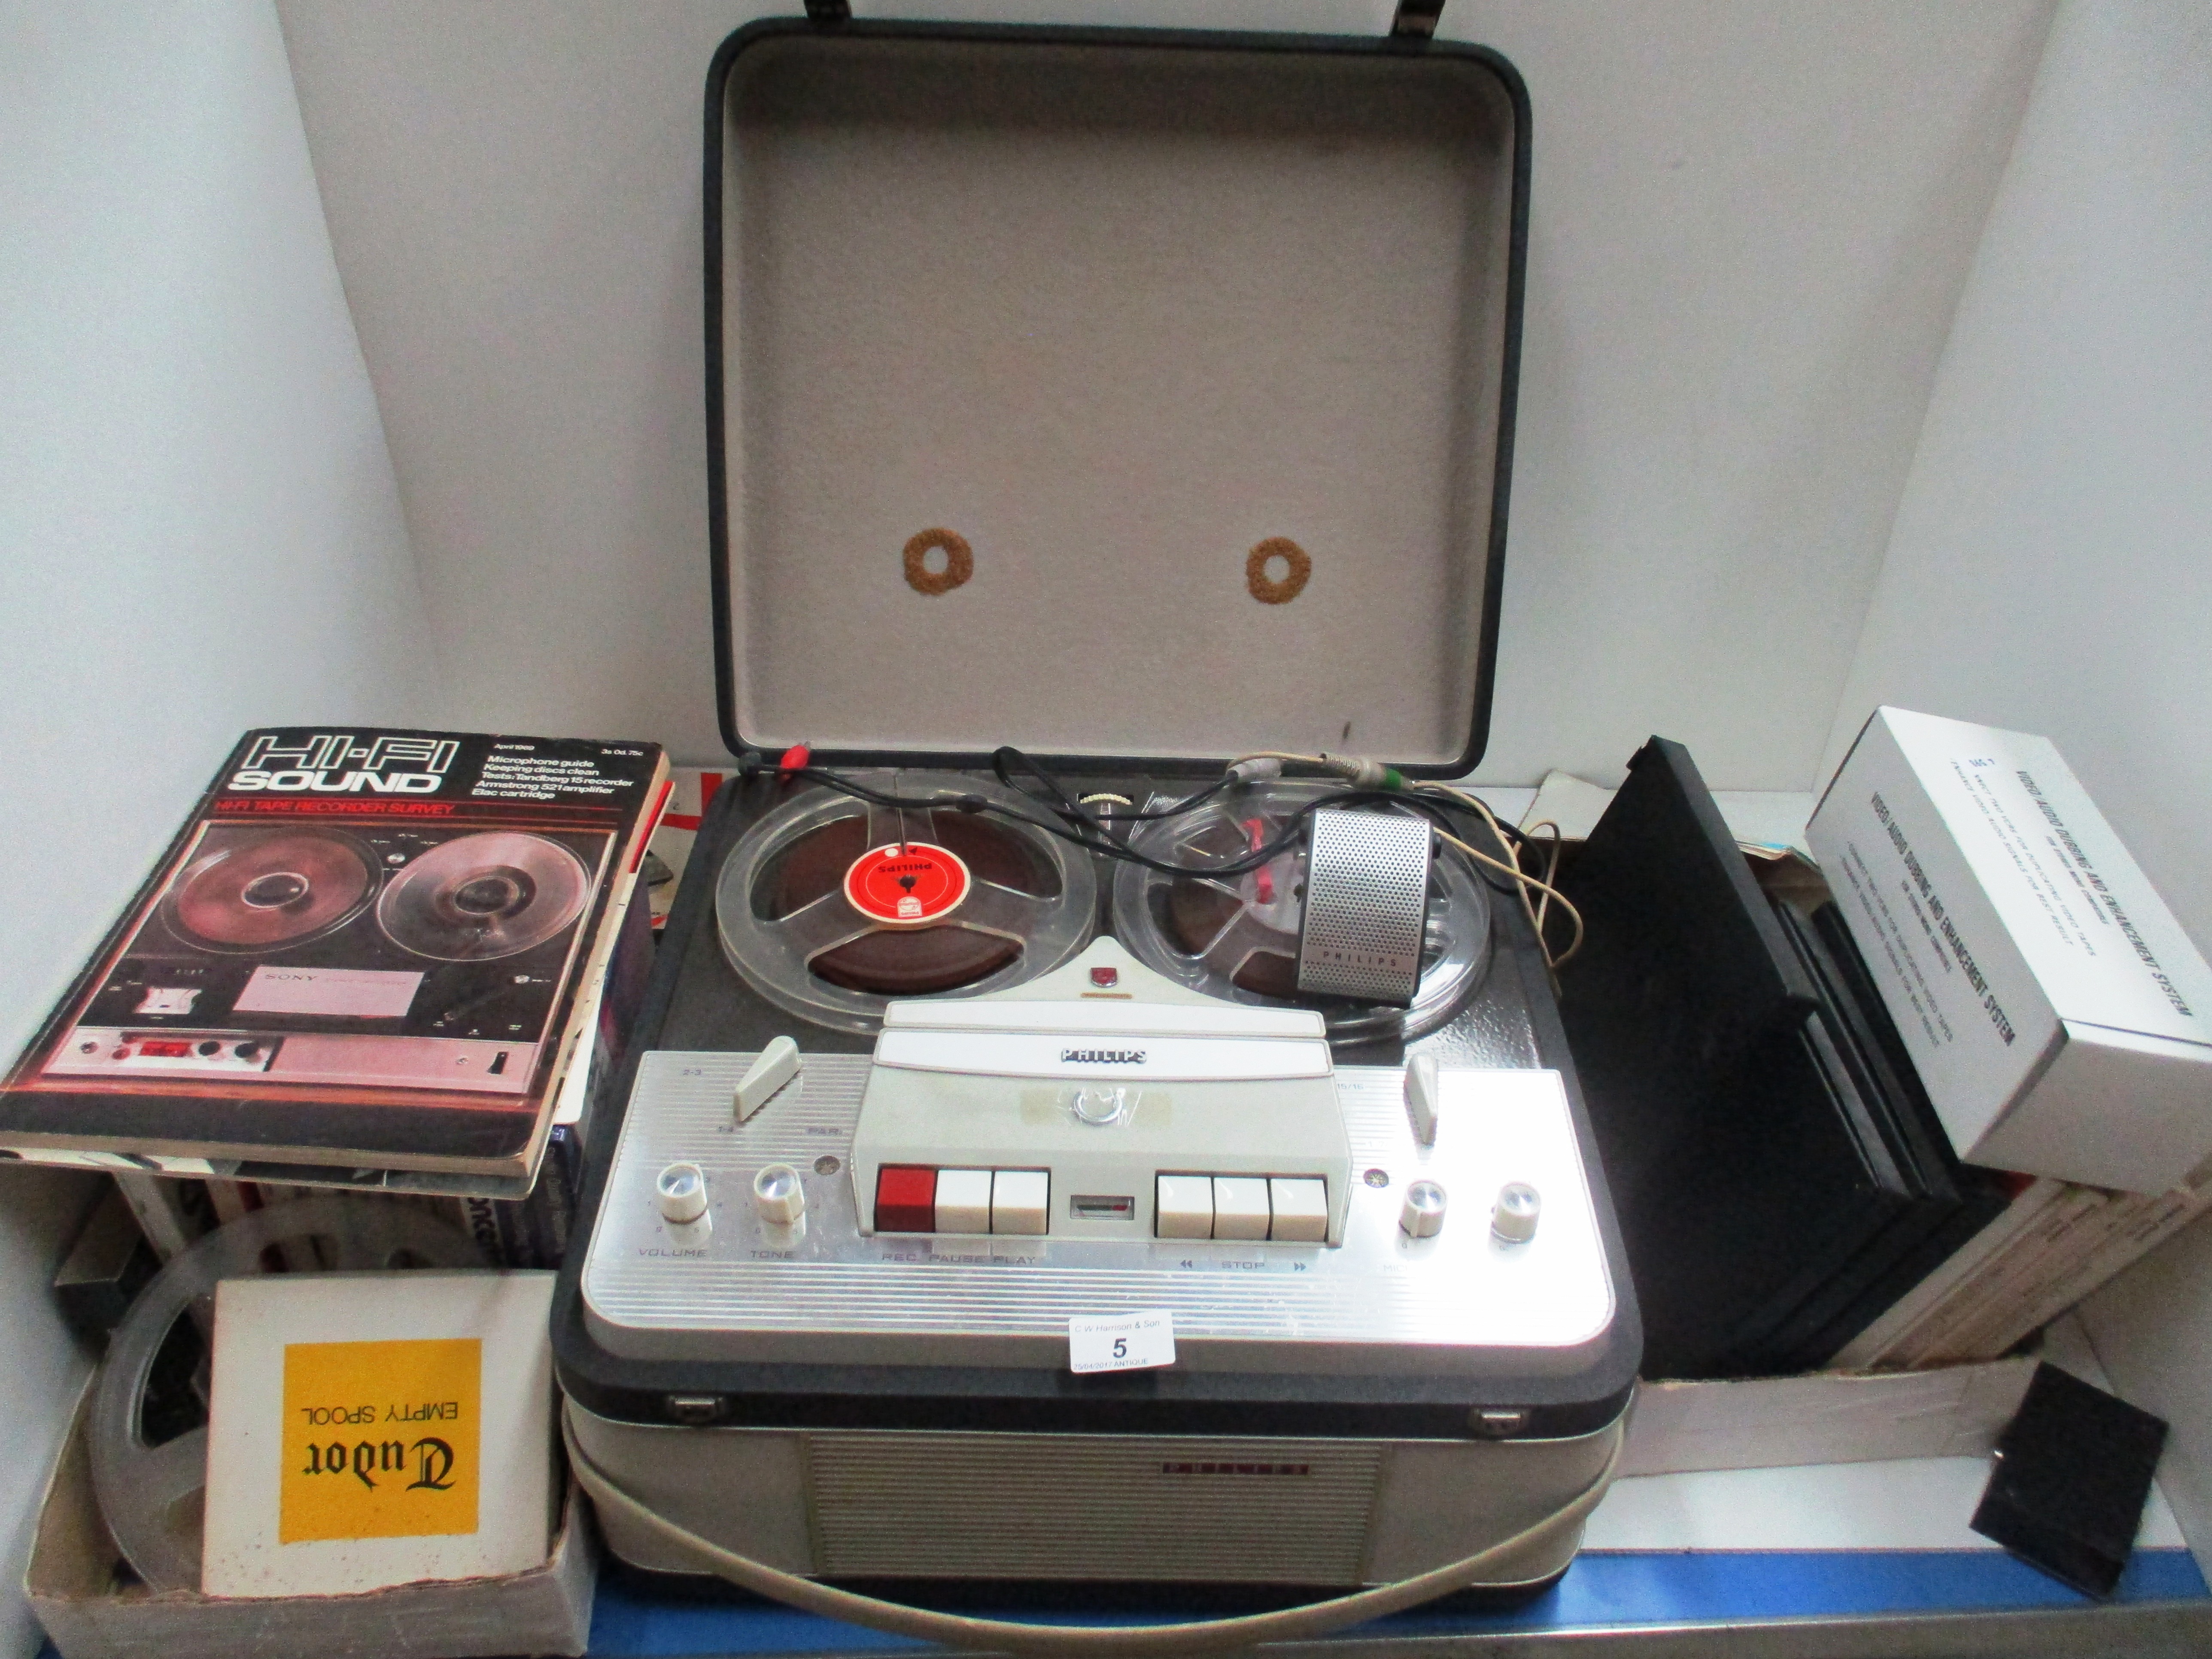 A Philips model EL3549 reel to reel tape recorder with built in remote and a quantity of reel to